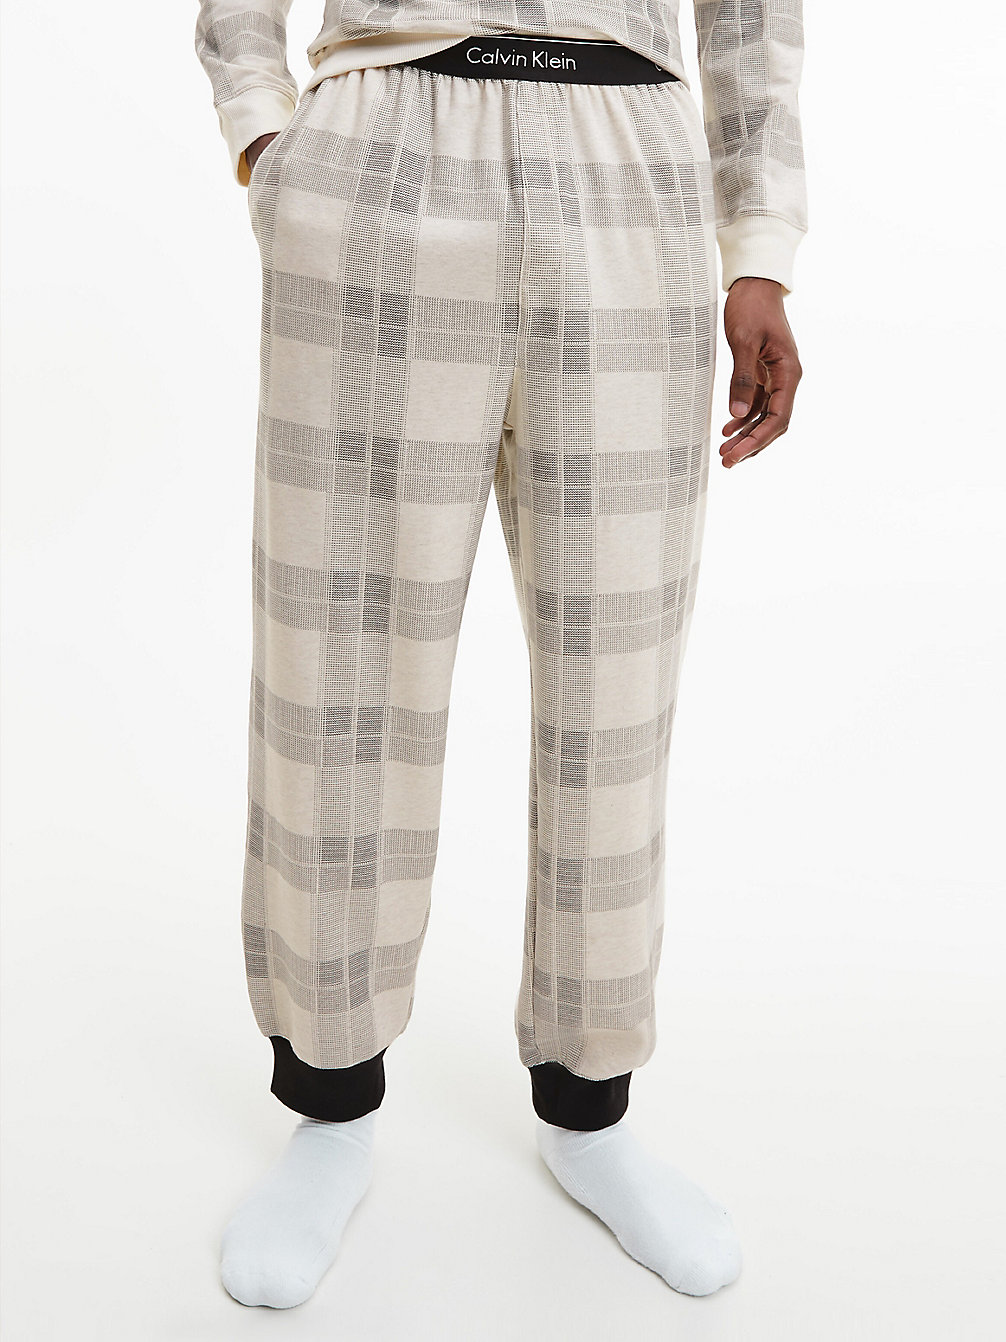 TEXTURED PLAID_OATMEAL HEATER Lounge Joggers undefined men Calvin Klein